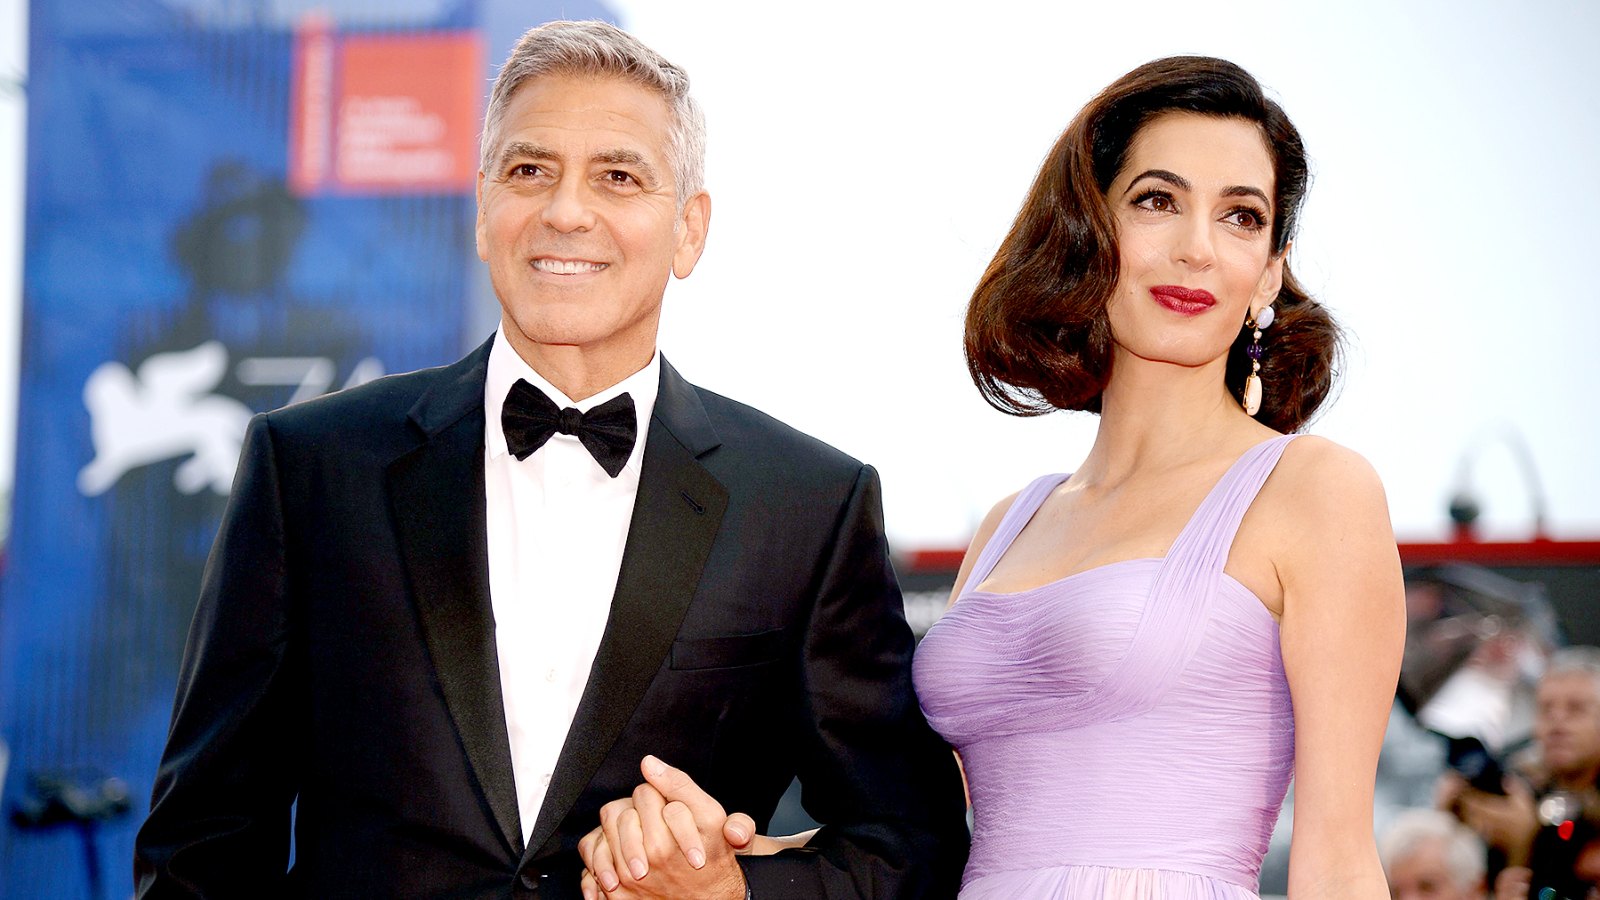 Do George Clooney's Twins Ella And Alexander Clooney Have Down Syndrome?